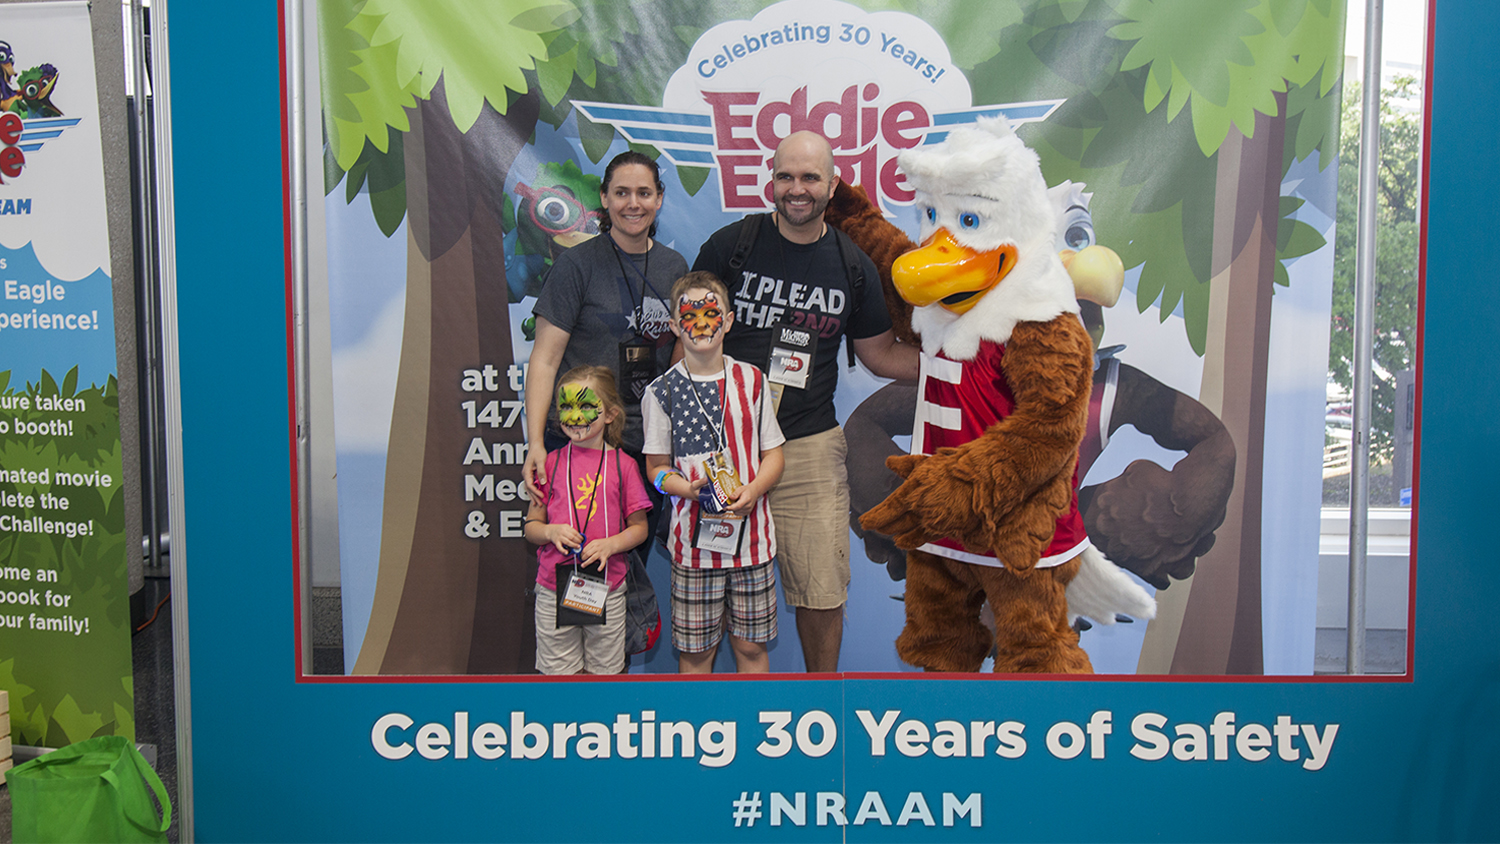 Family Fun in the Eddie Eagle Zone at NRA Annual Meetings